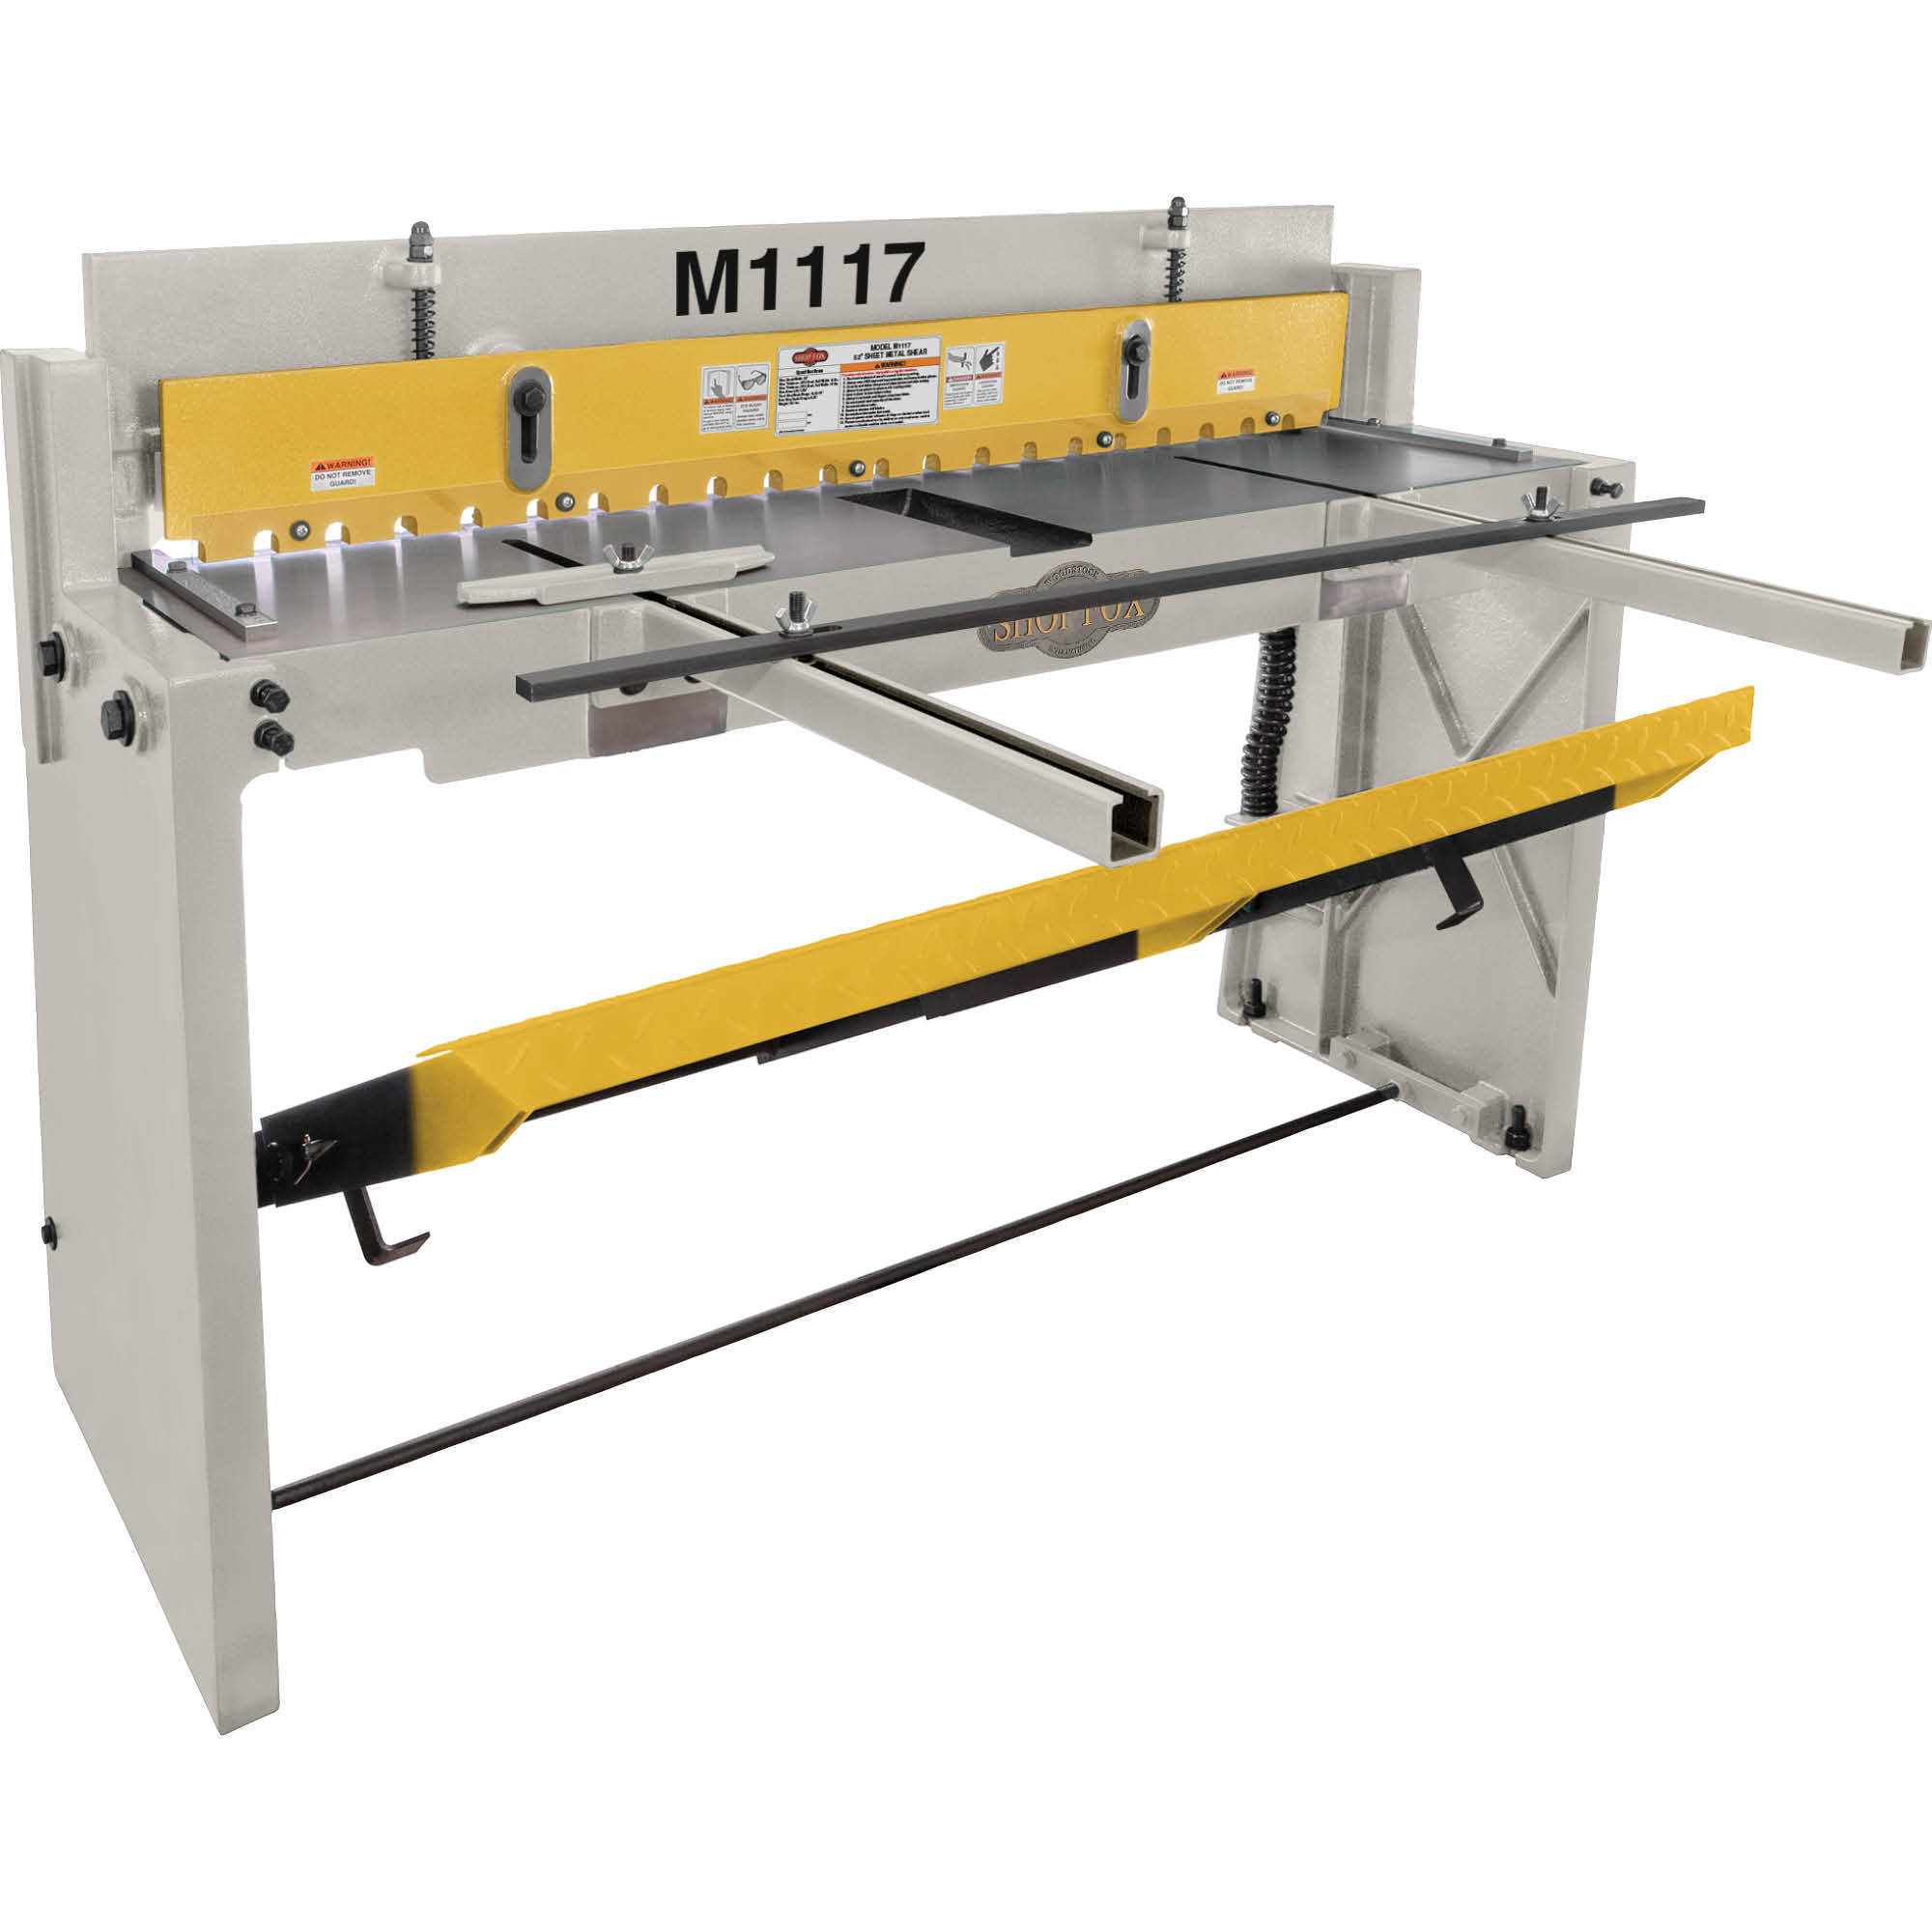 Shop Fox, 52Inch Sheet Metal Shear with Bevel Gauge, Max. Cutting Length 52 in, Max. Material Thickness 16 ga, Model M1117